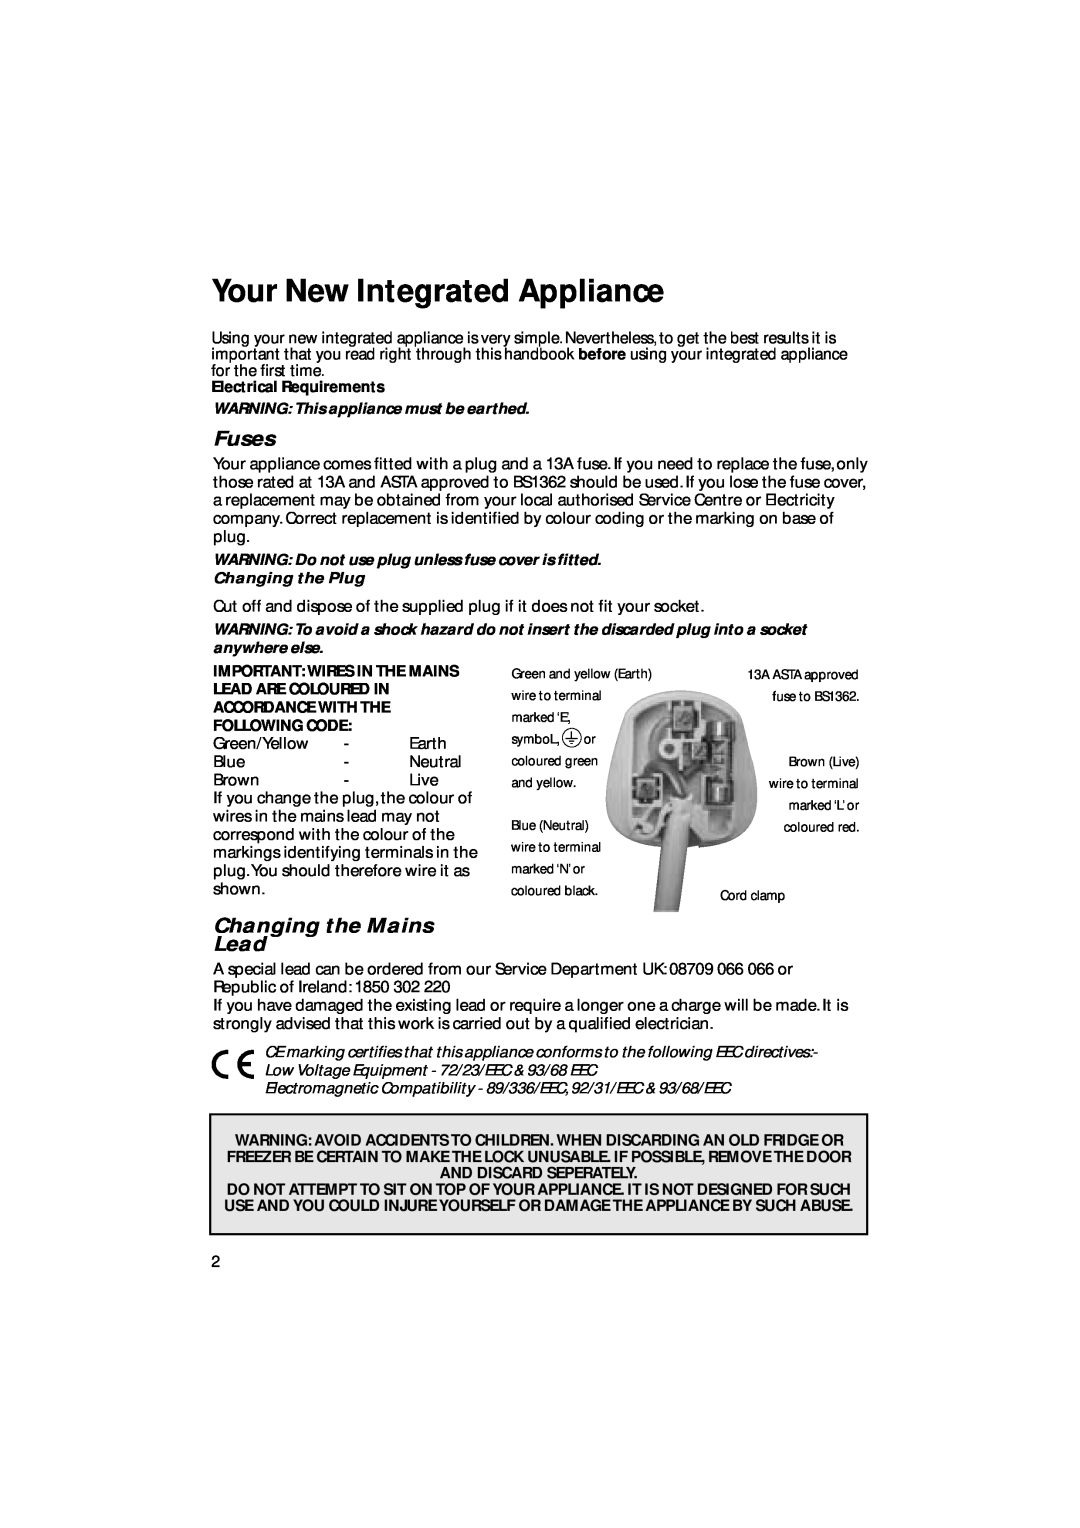 Hotpoint BL31 manual Your New Integrated Appliance, Fuses, Changing the Mains Lead, Electrical Requirements 